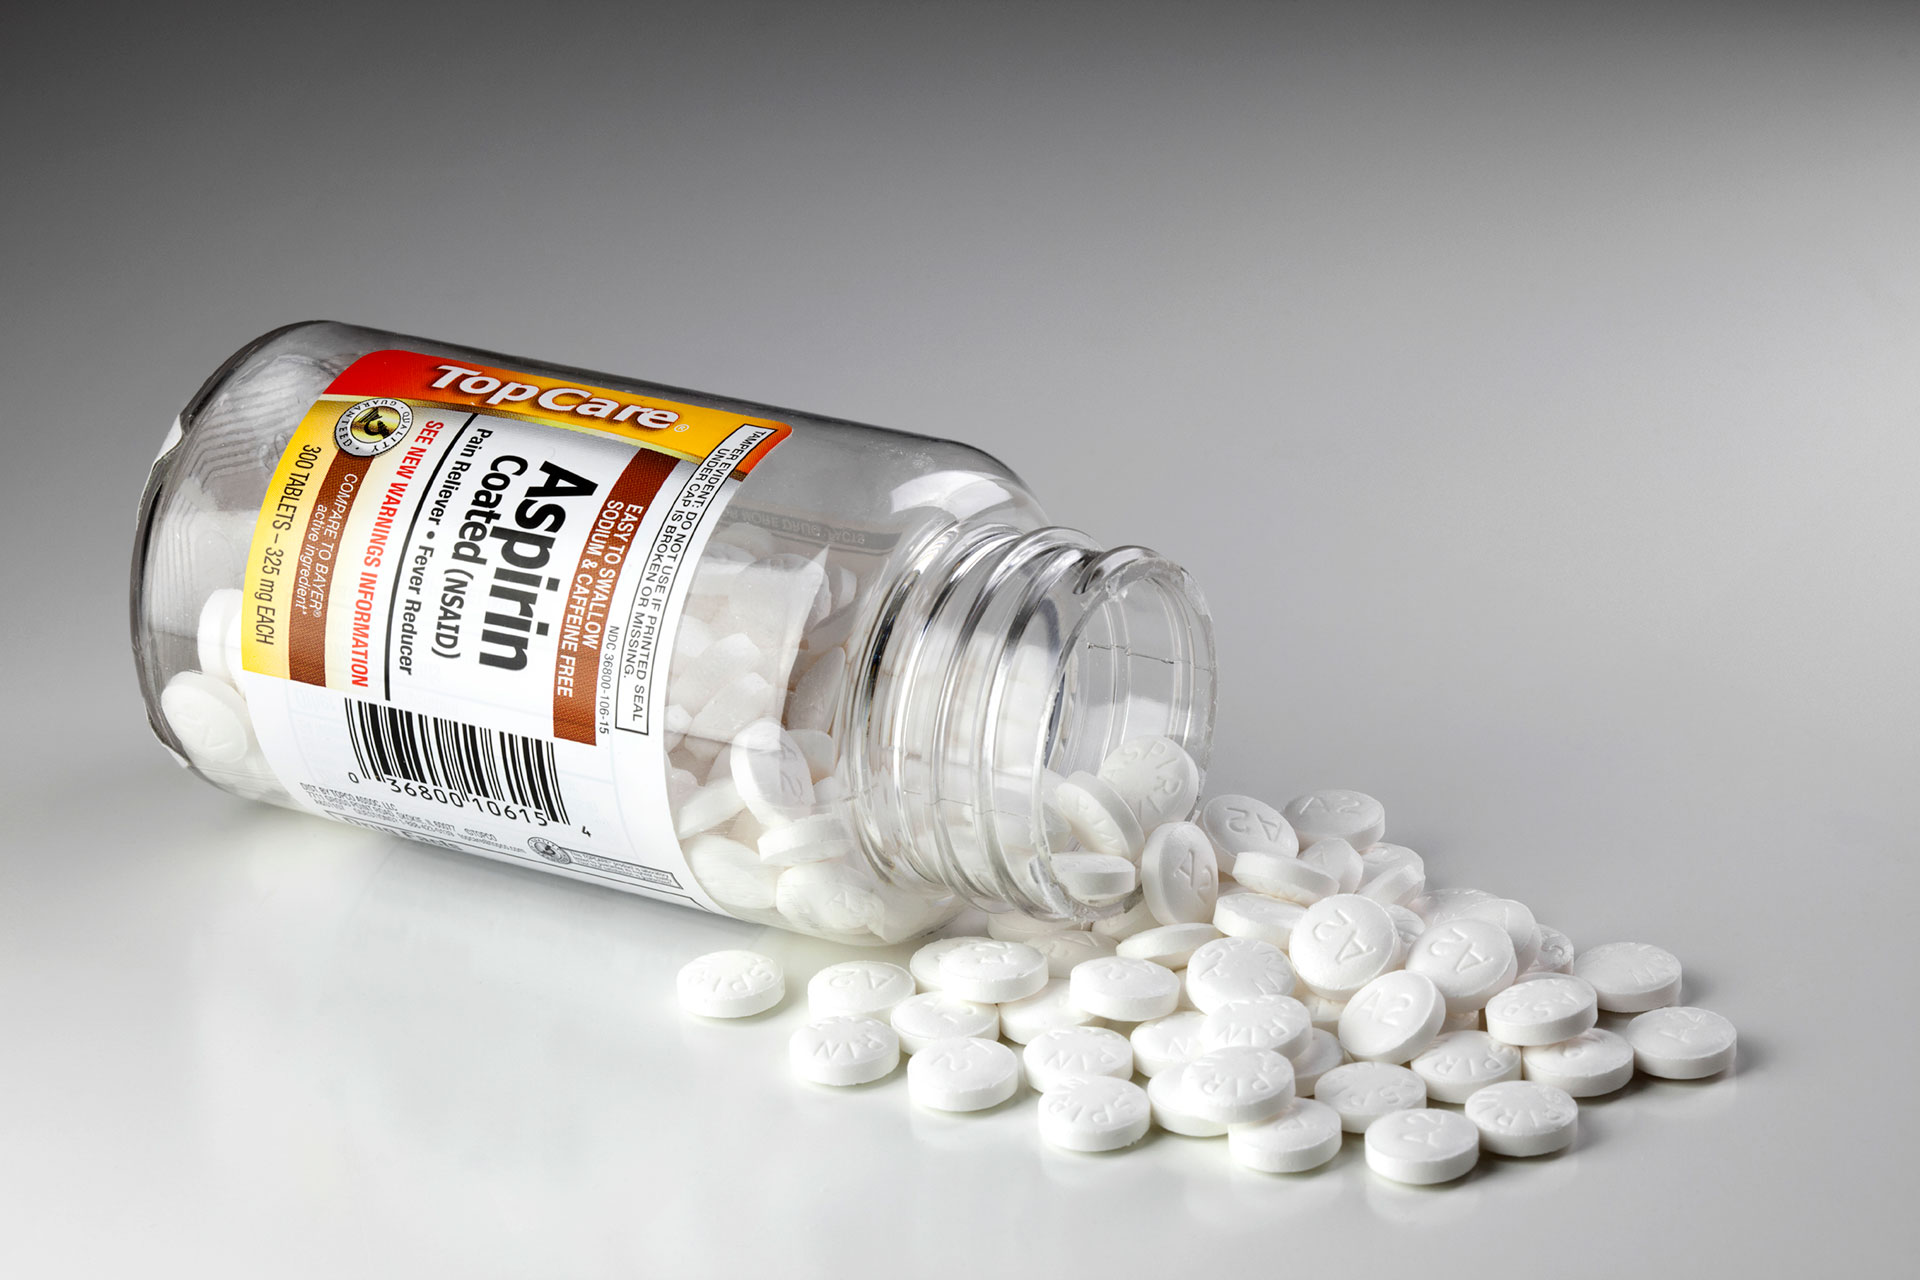 Why You Should Rethink That Daily Dose of Aspirin | KQED